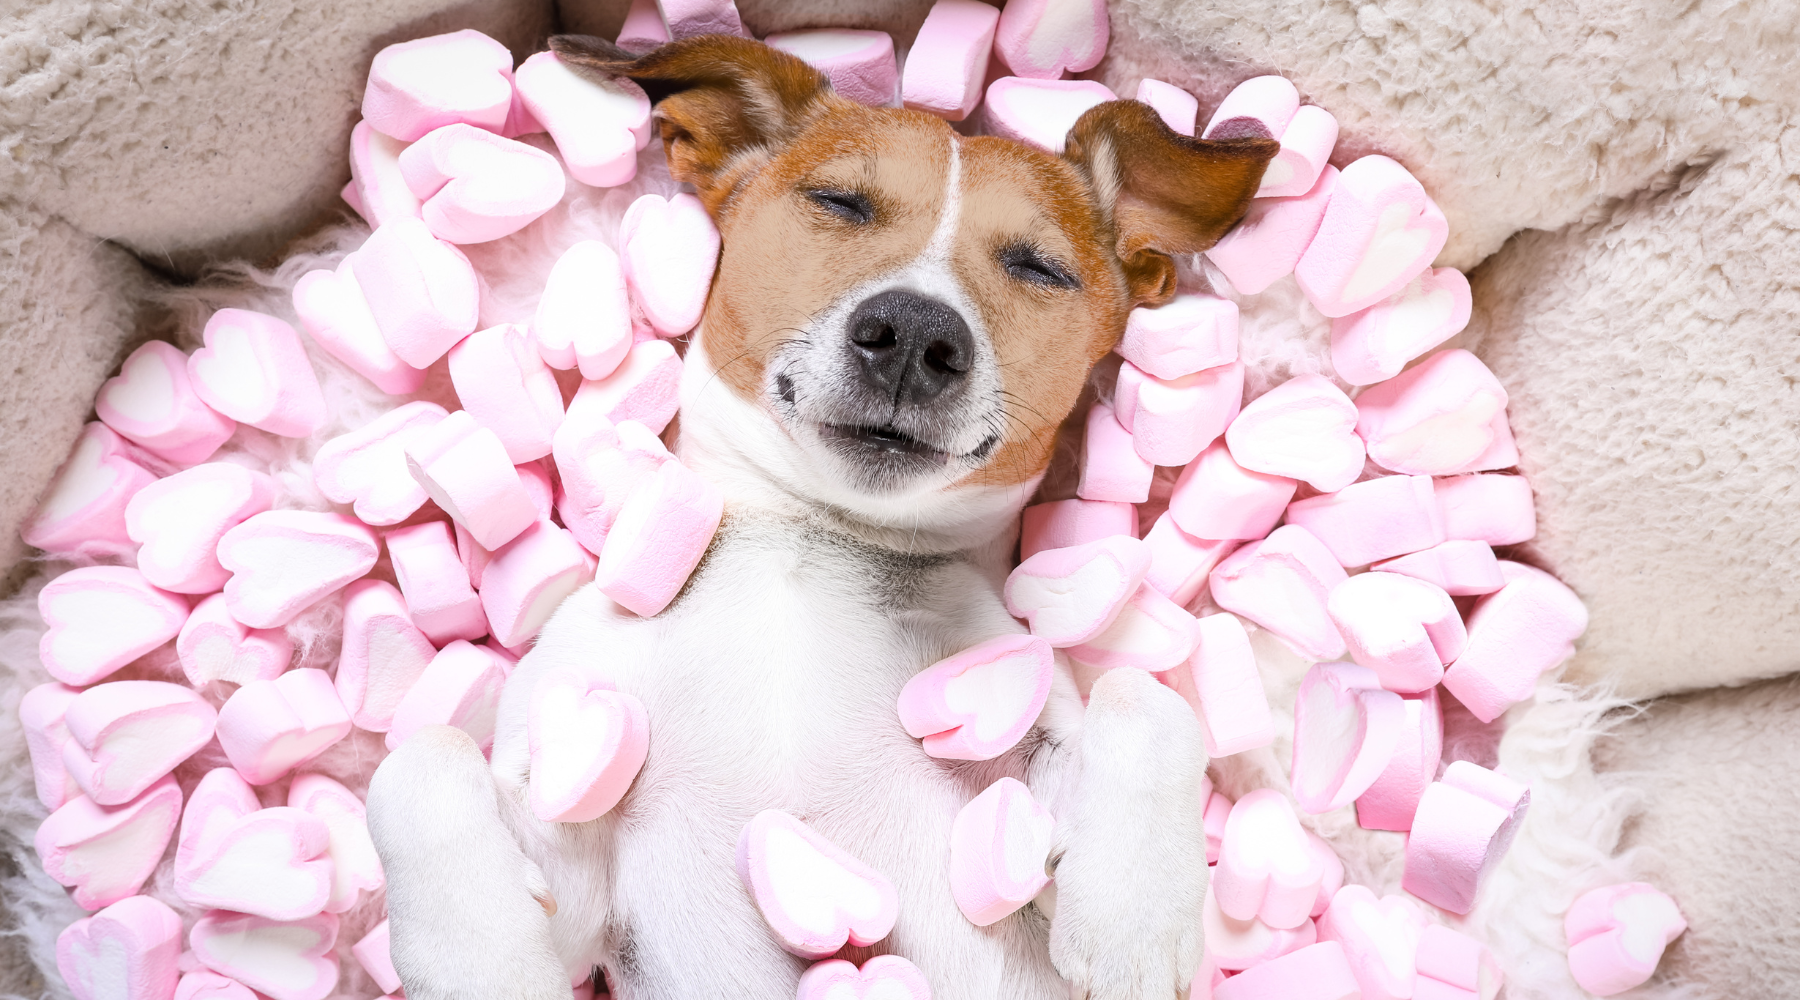 Dog with pink hearts